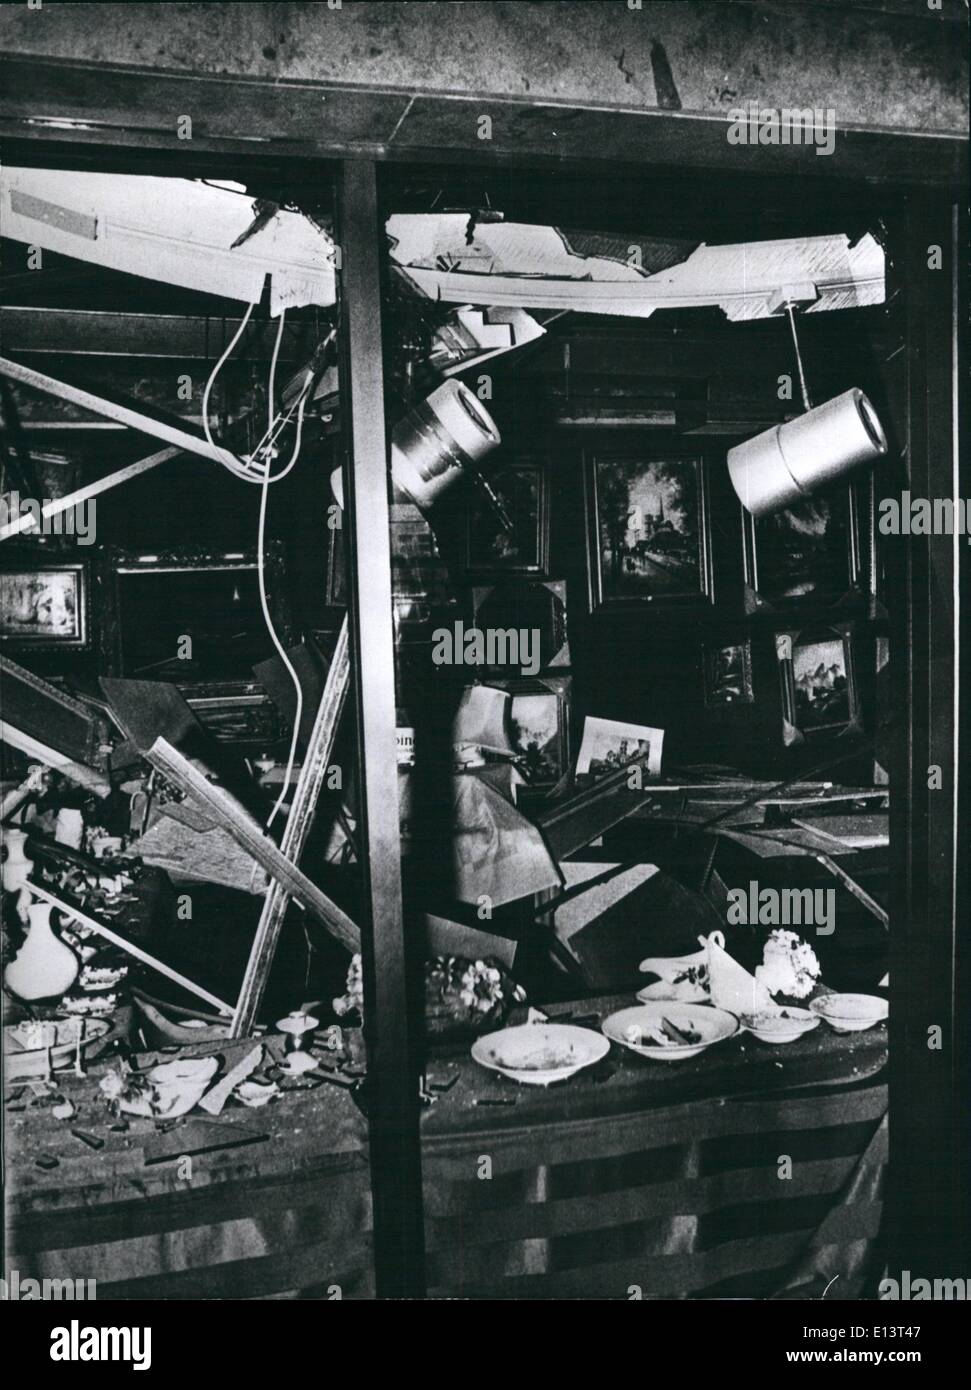 Mar. 27, 2012 - Two Bombs Exploded At Headquarters of The 5th US Army Corps In Frankfurt: 16 Persons Injured. Two bombs exploded in the building of the headquarters of the 5th US Army Corps in Frankfurt on June 1st 1976, injuring 16 persons, from which one seriously. The first bomb exploded on 1.20 pm in the first intermediate storey, some minutes later another bomb exploded at the officer's club. The American military police have taken three men into custody Stock Photo